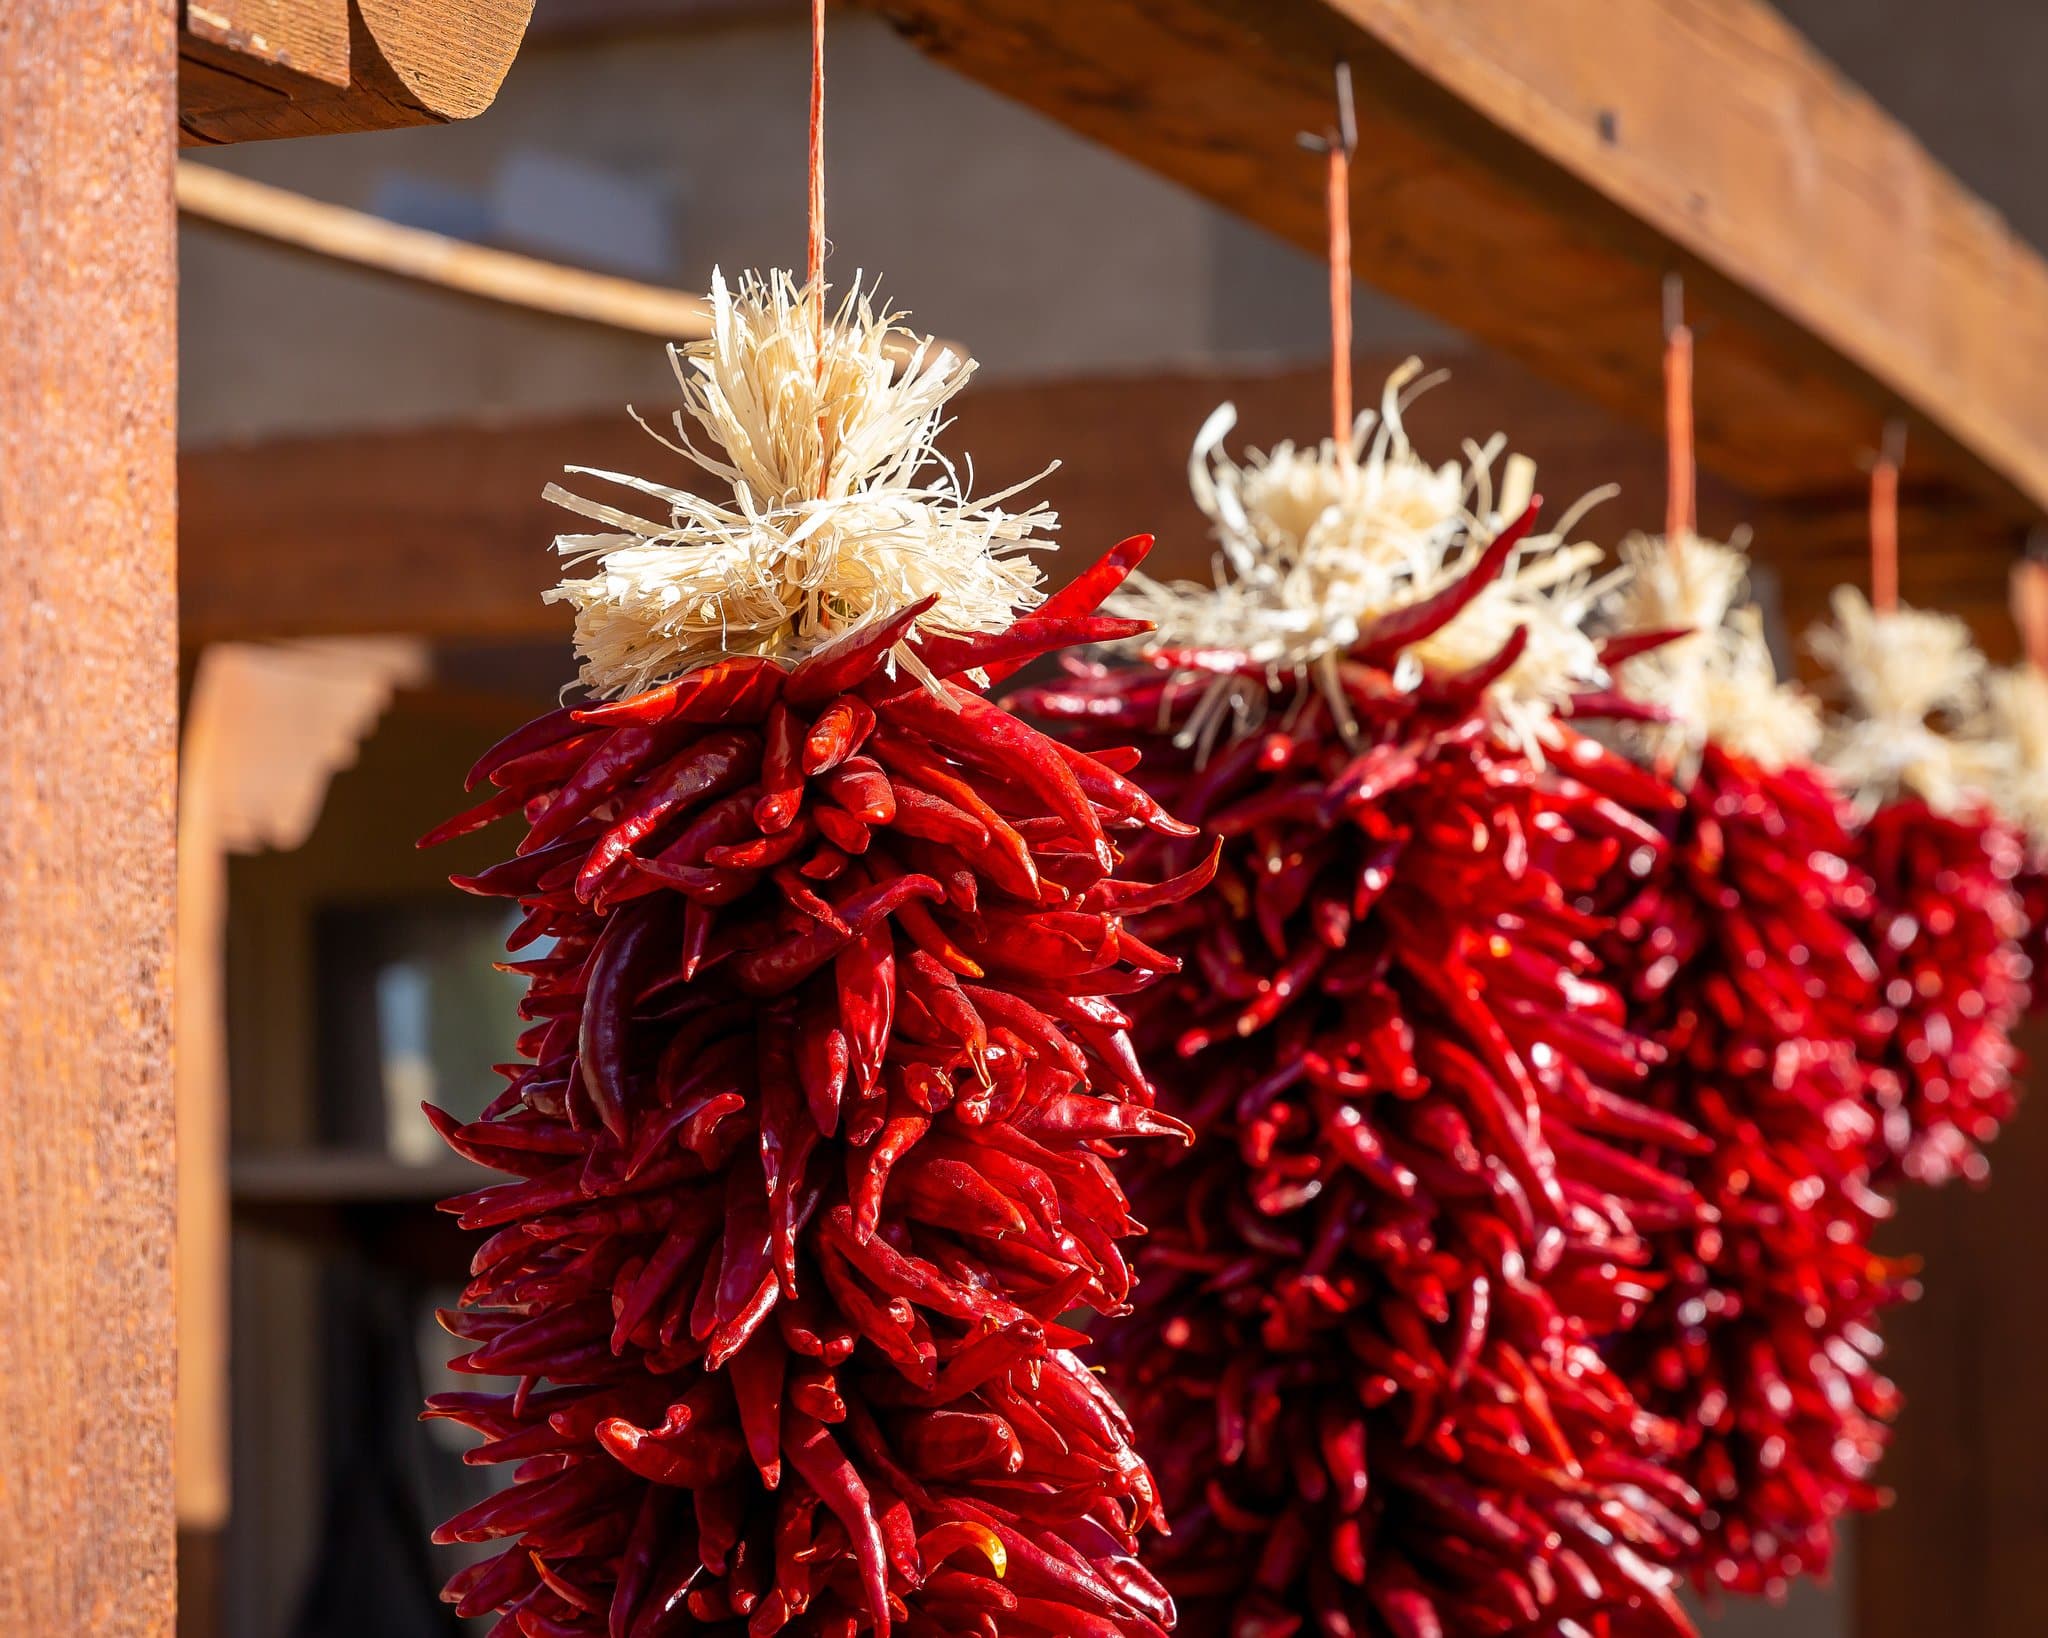 Chile Pequin ristras of red chili peppers hanging from a wooden beam, with straw tied at the top of each bunch, set against a soft-focused building background.